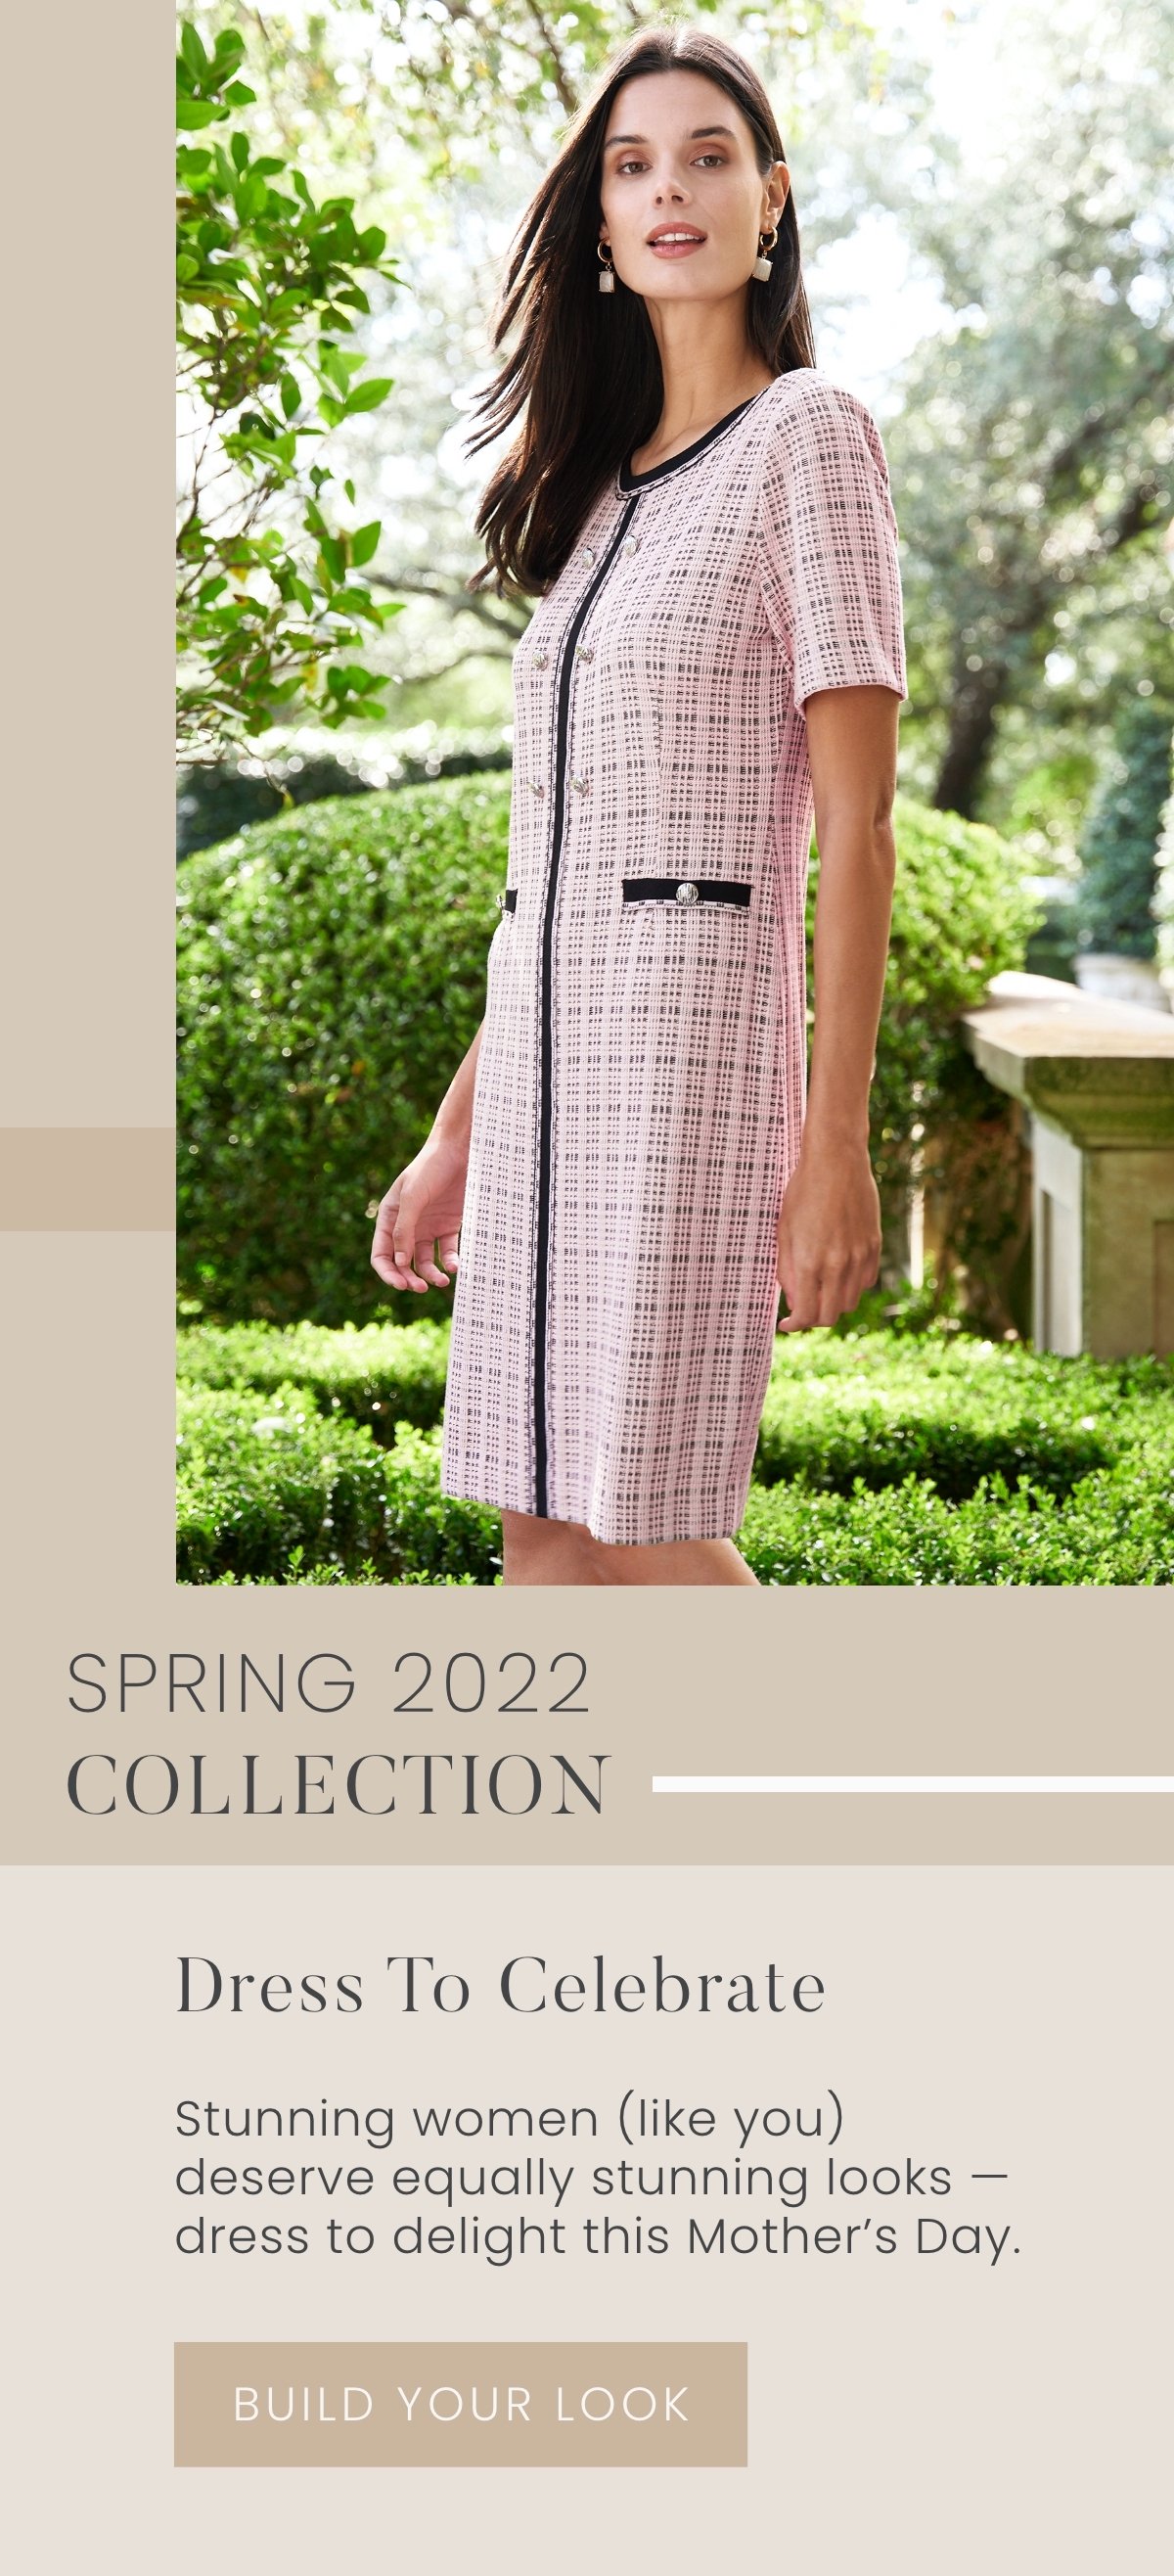 Spring 2022 Collection: Dress to Celebrate - Stunning women (like you) deserve equally stunning looks — dress to delight this Mother's Day. Build Your Look >>